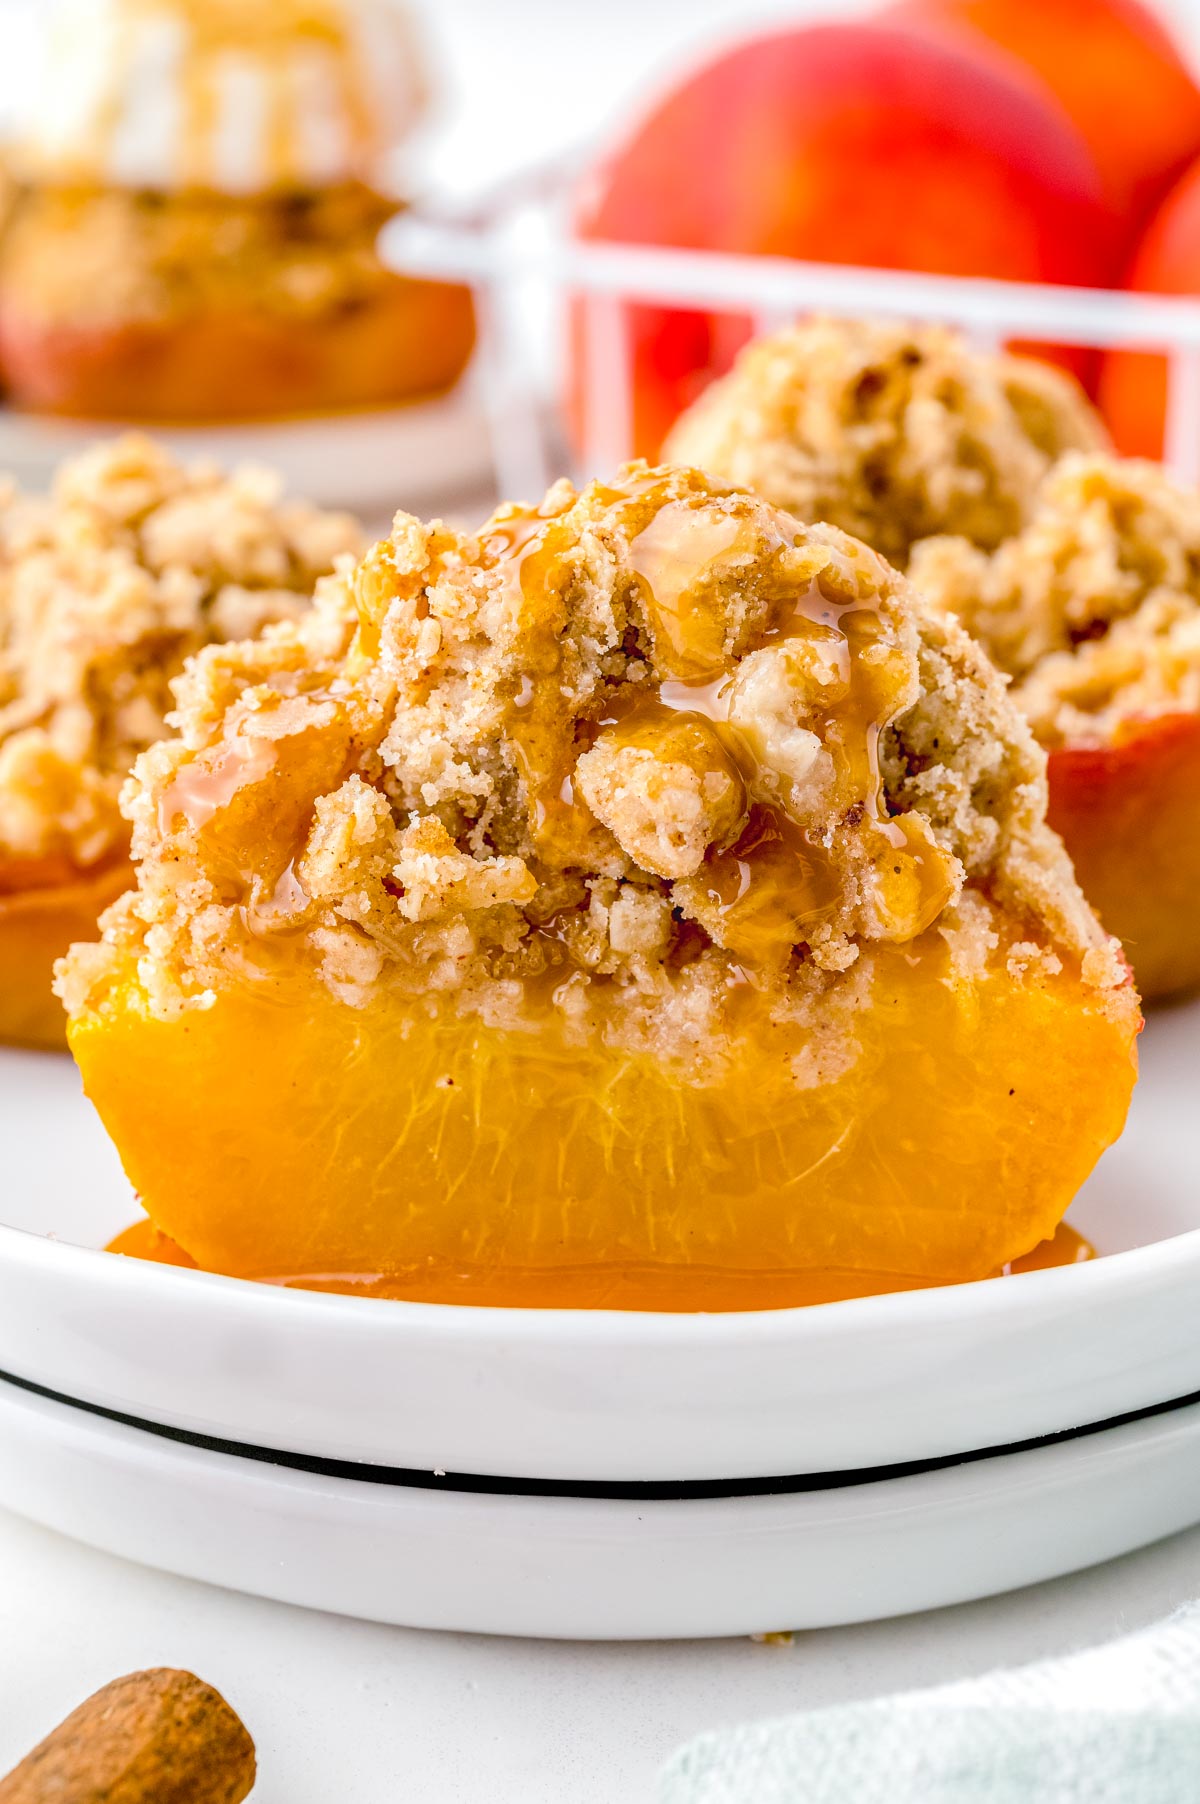 The finished recipe for Baked Peaches cur into so you can what it looks like on the inside.